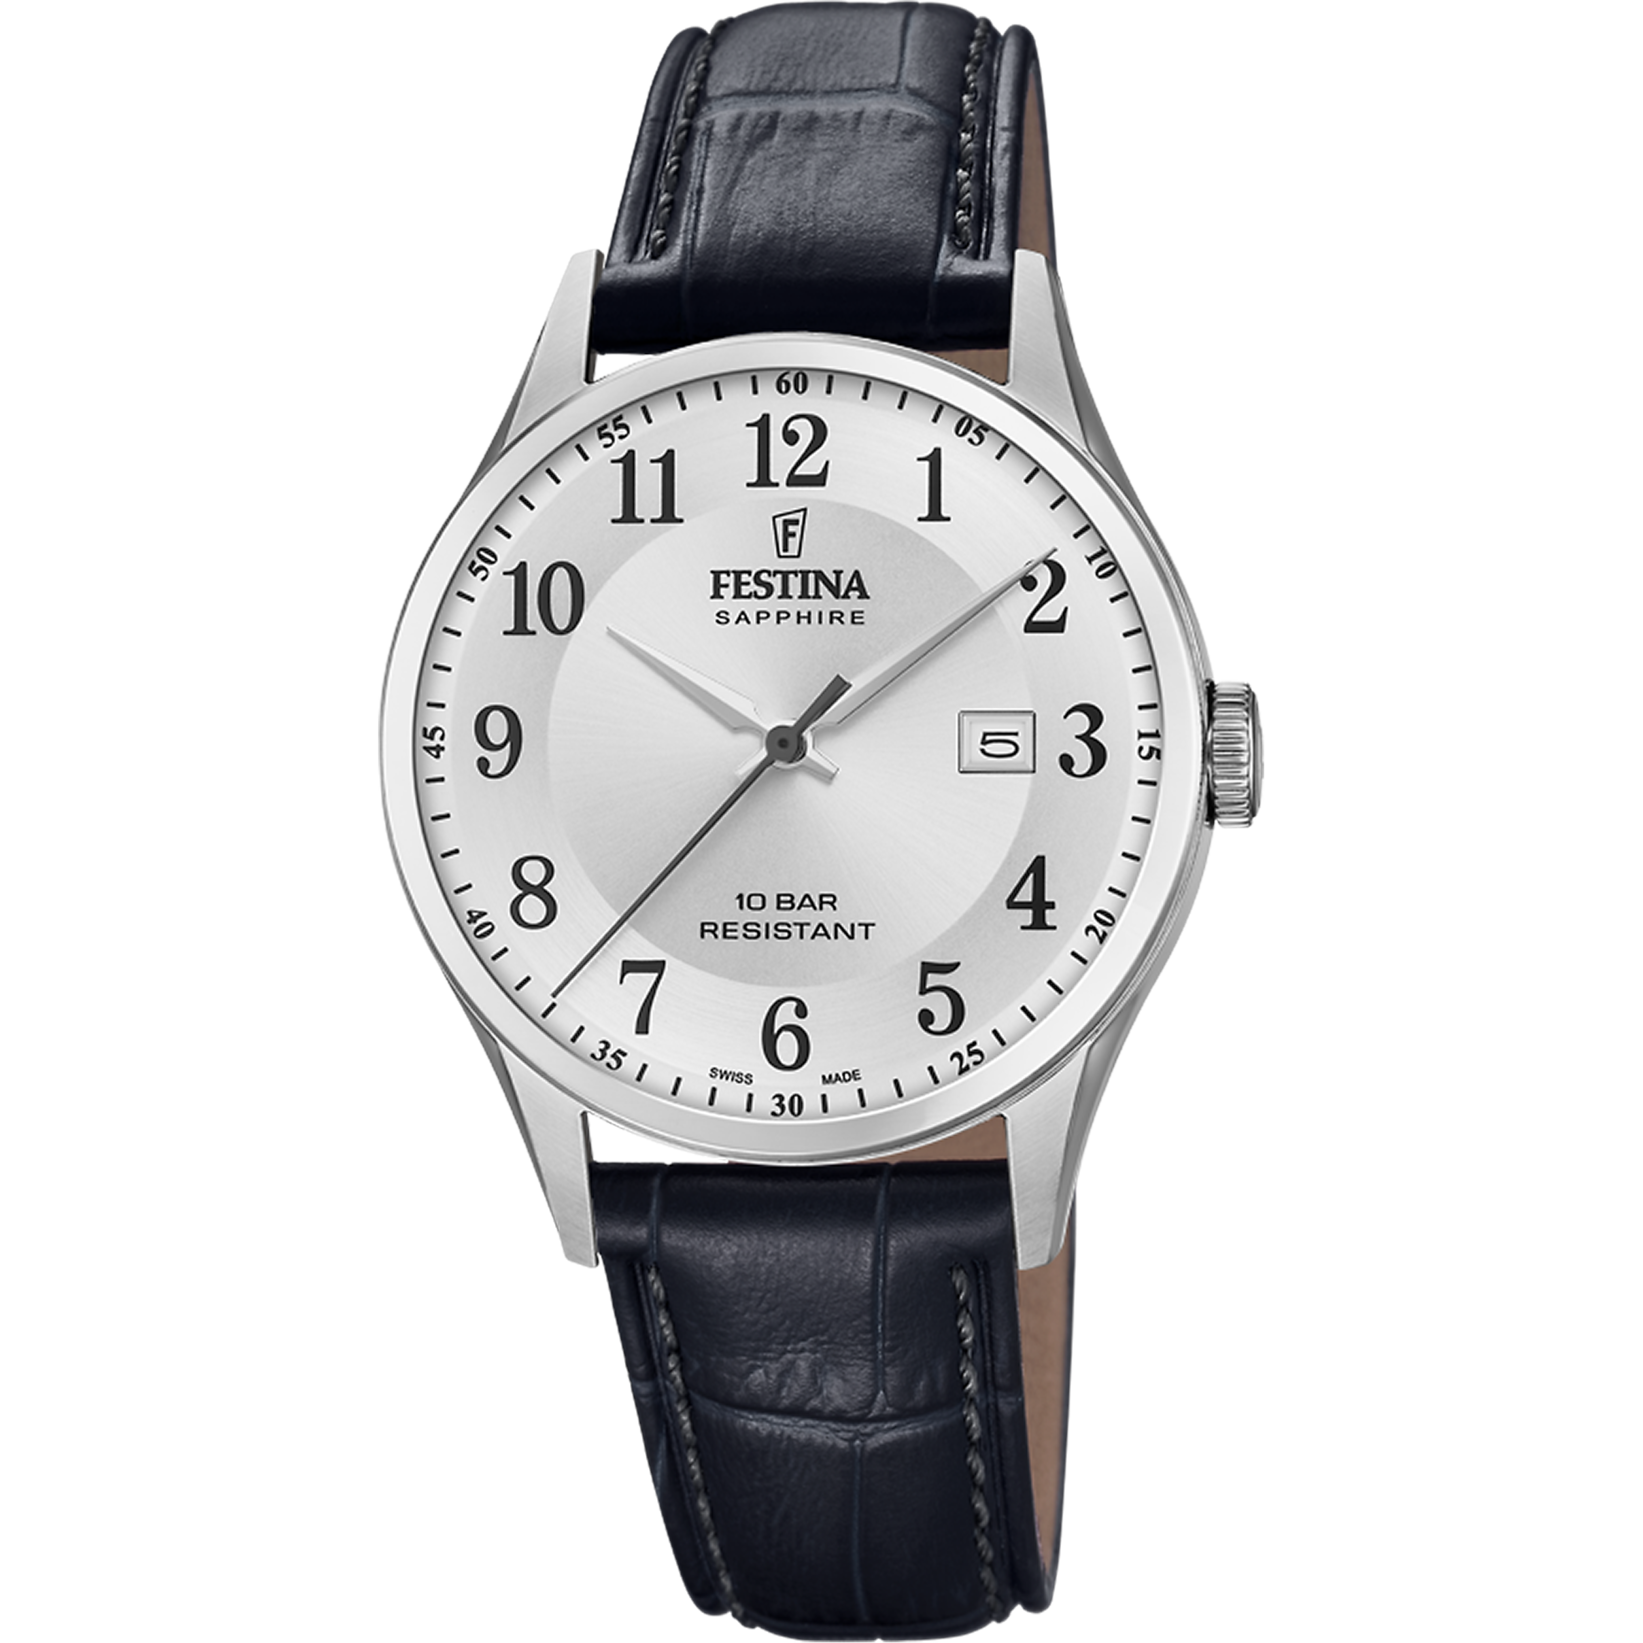 FESTINA SWISS MADE WATCH F20007/1 SILVER LEATHER STRAP, MEN'S